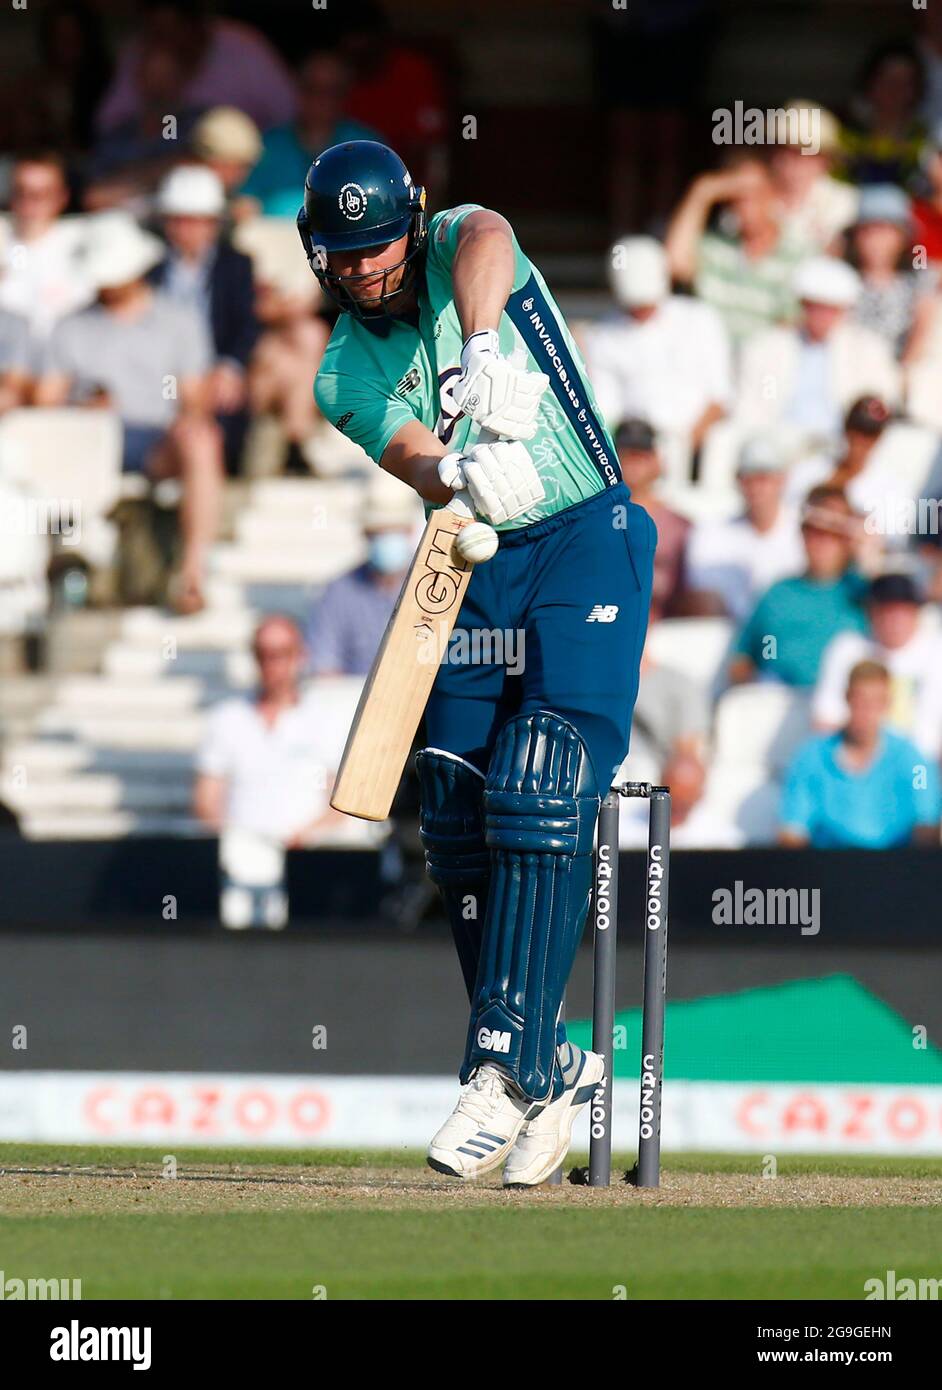 LONDON, ENGLAND - July 22: Will Jacks of Oval Invincibles during The Hundred between Oval Invincible Men and Manchester Originals Men at Kia Oval Stad Stock Photo